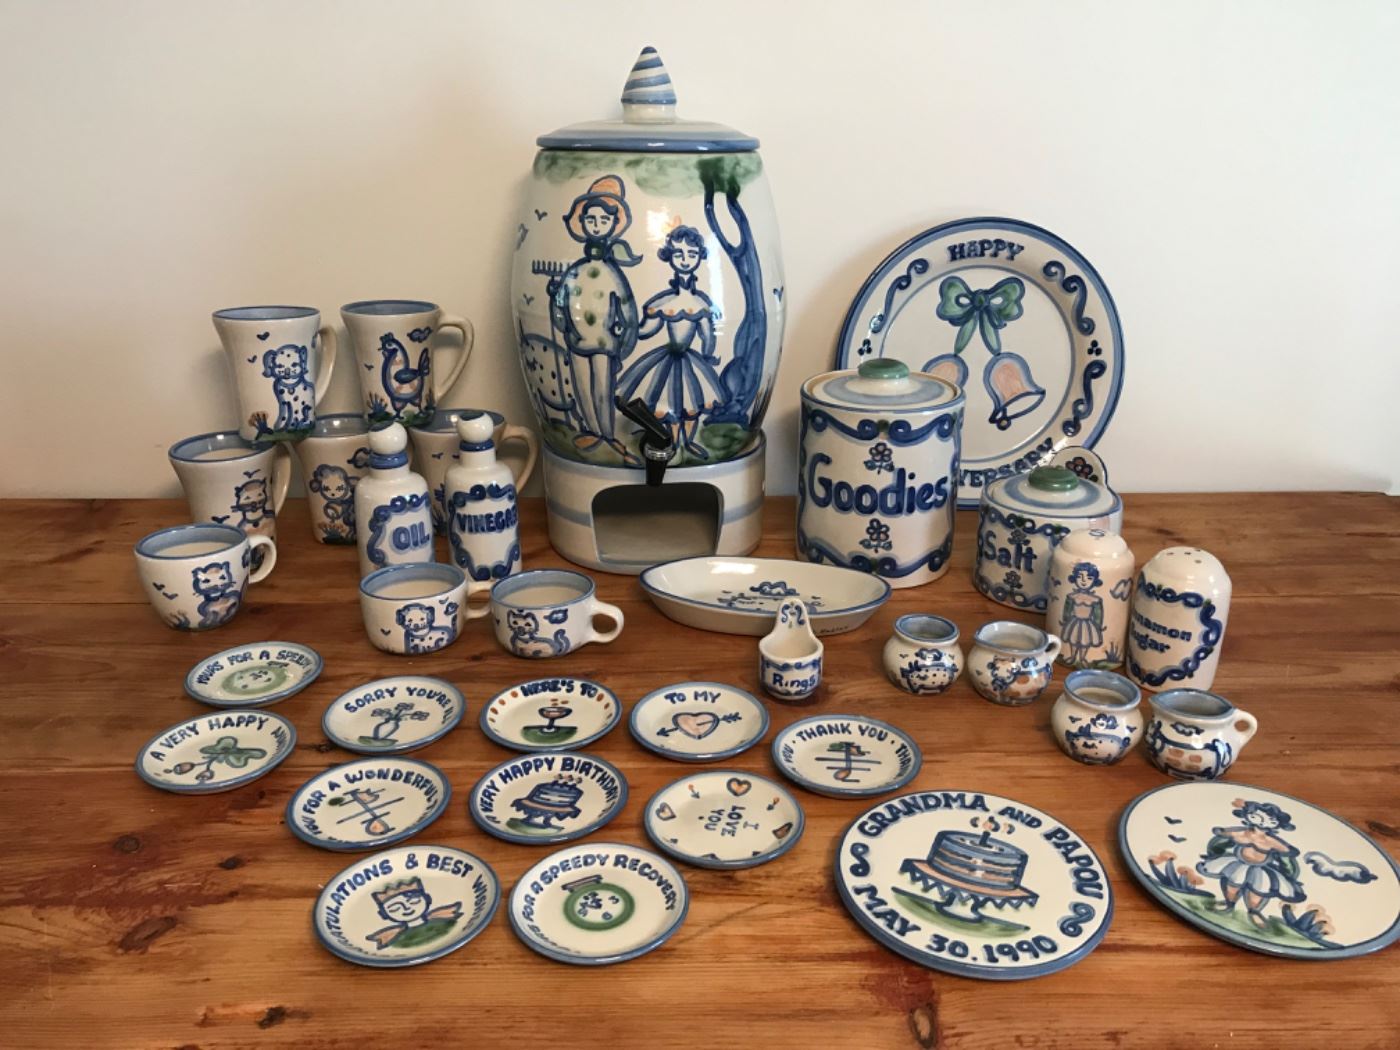 Huge selection of MA Hadley pottery - much more than pictured.